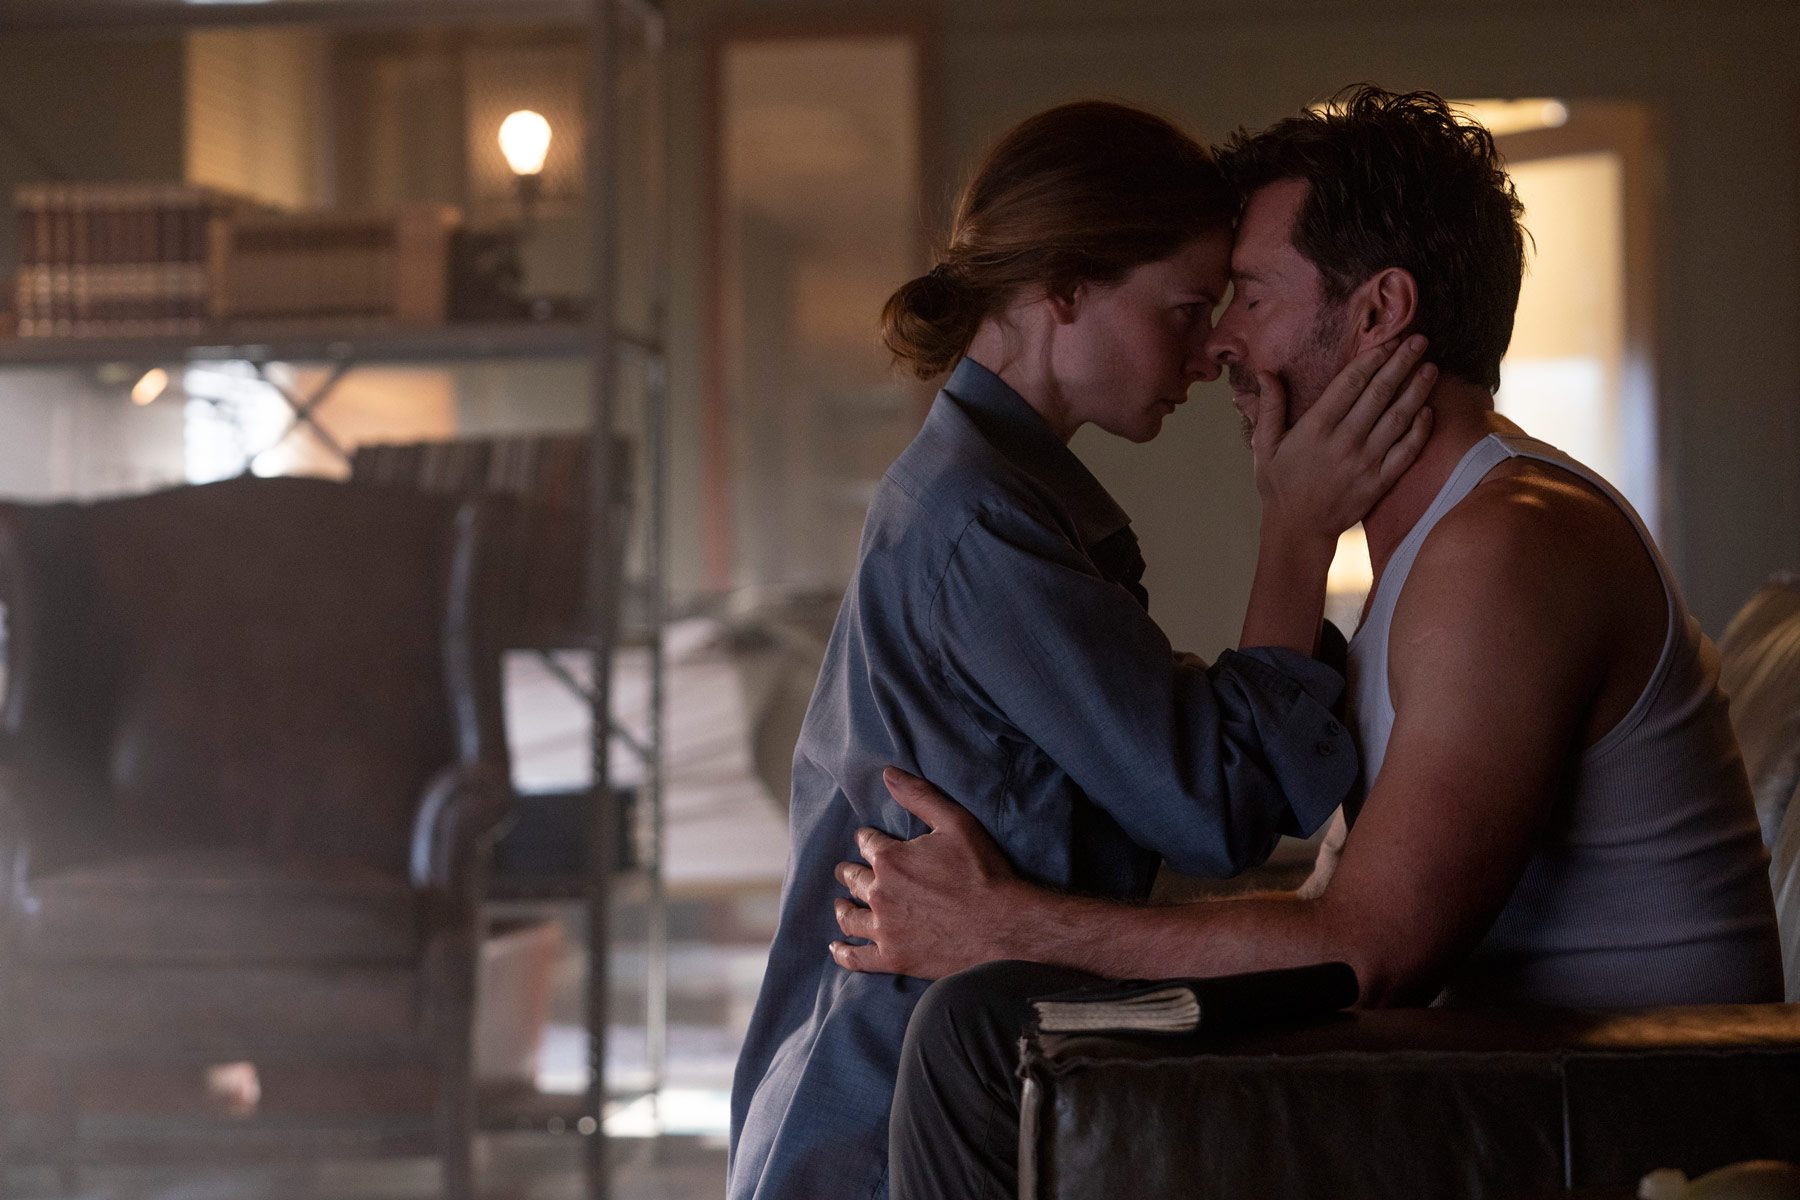 (L-r) REBECCA FERGUSON as Mae and HUGH JACKMAN as Nick Bannister in Warner Bros. Pictures’ action thriller “REMINISCENCE,” a Warner Bros. Pictures release.